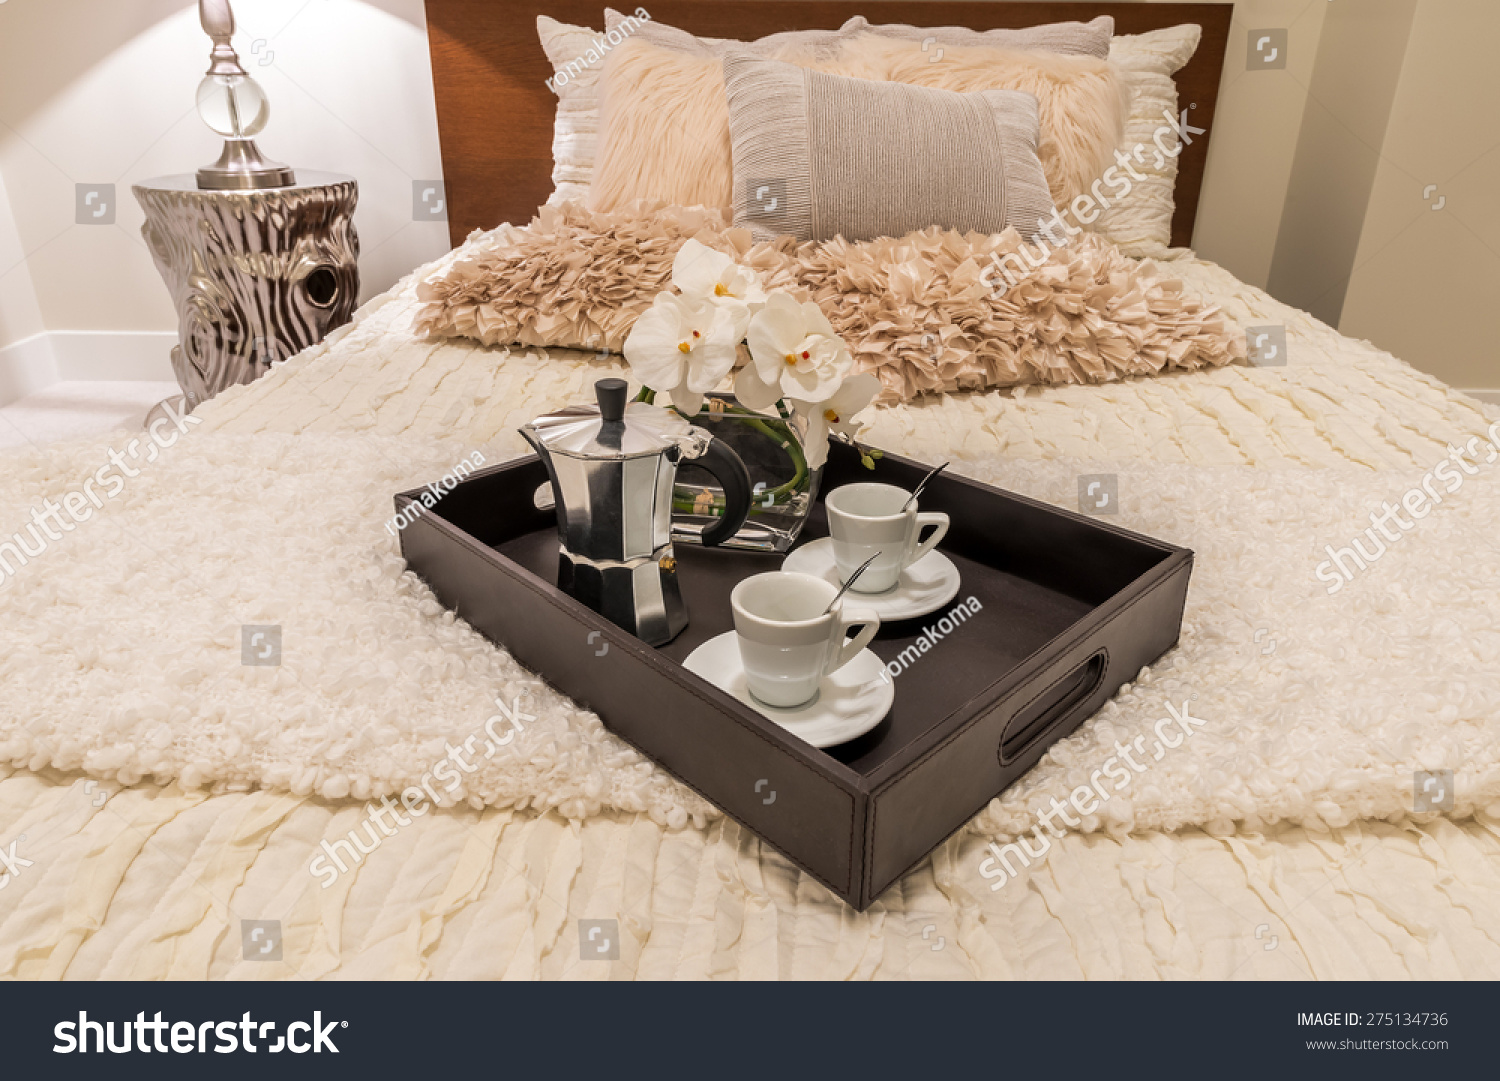 Decorative Tray Coffee Set On Bed Stock Photo Edit Now 275134736